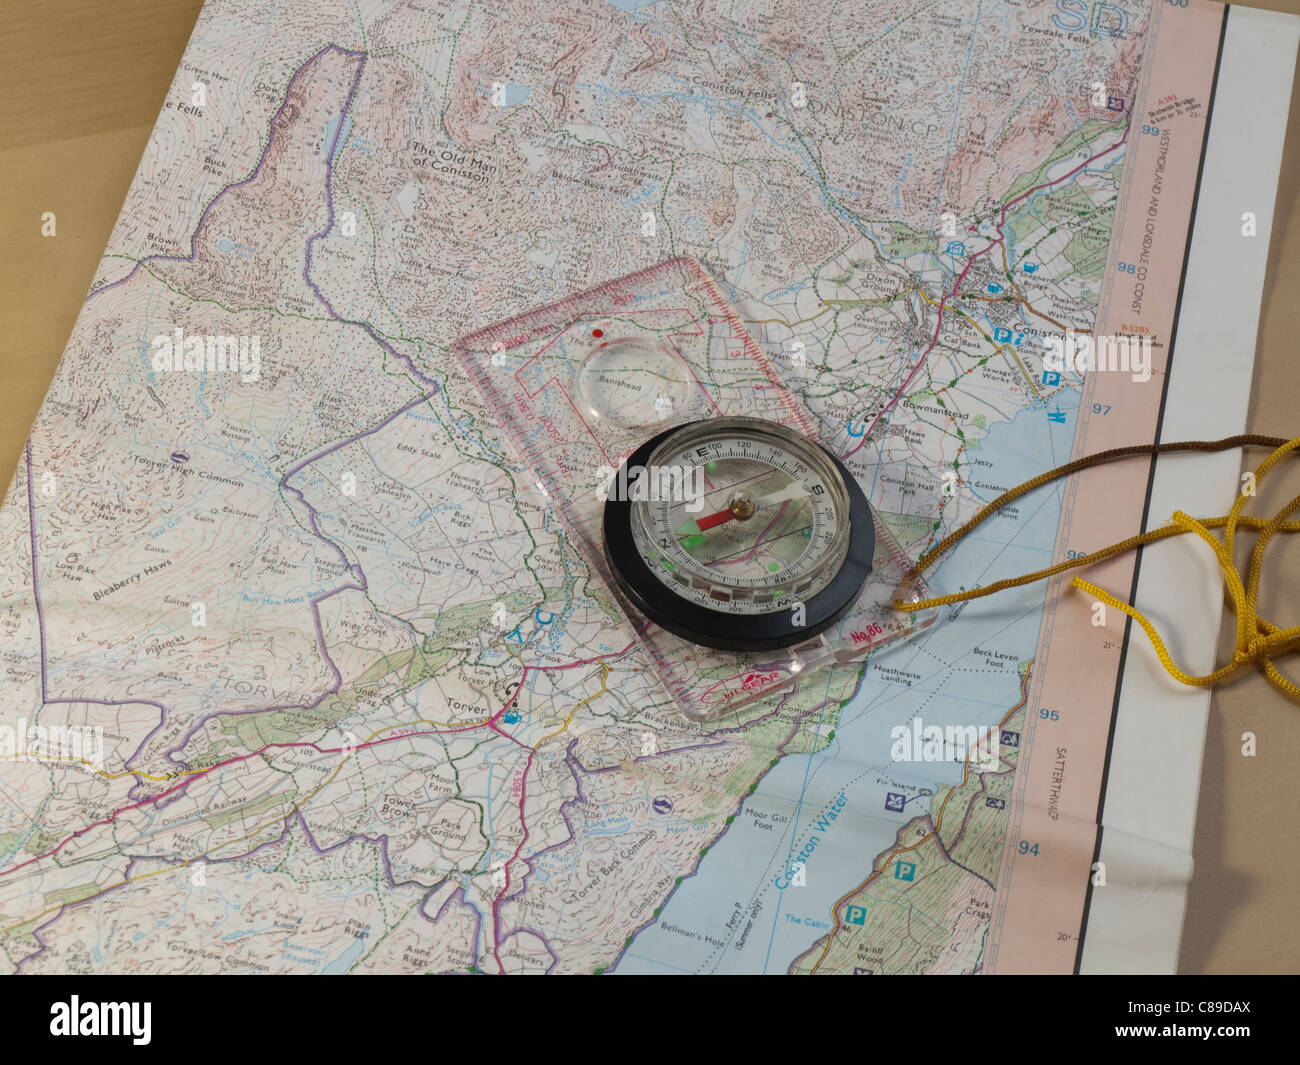 Ordnance survey map of the area of Coniston in the English Lake District with a hiker's compass on a table. Stock Photo